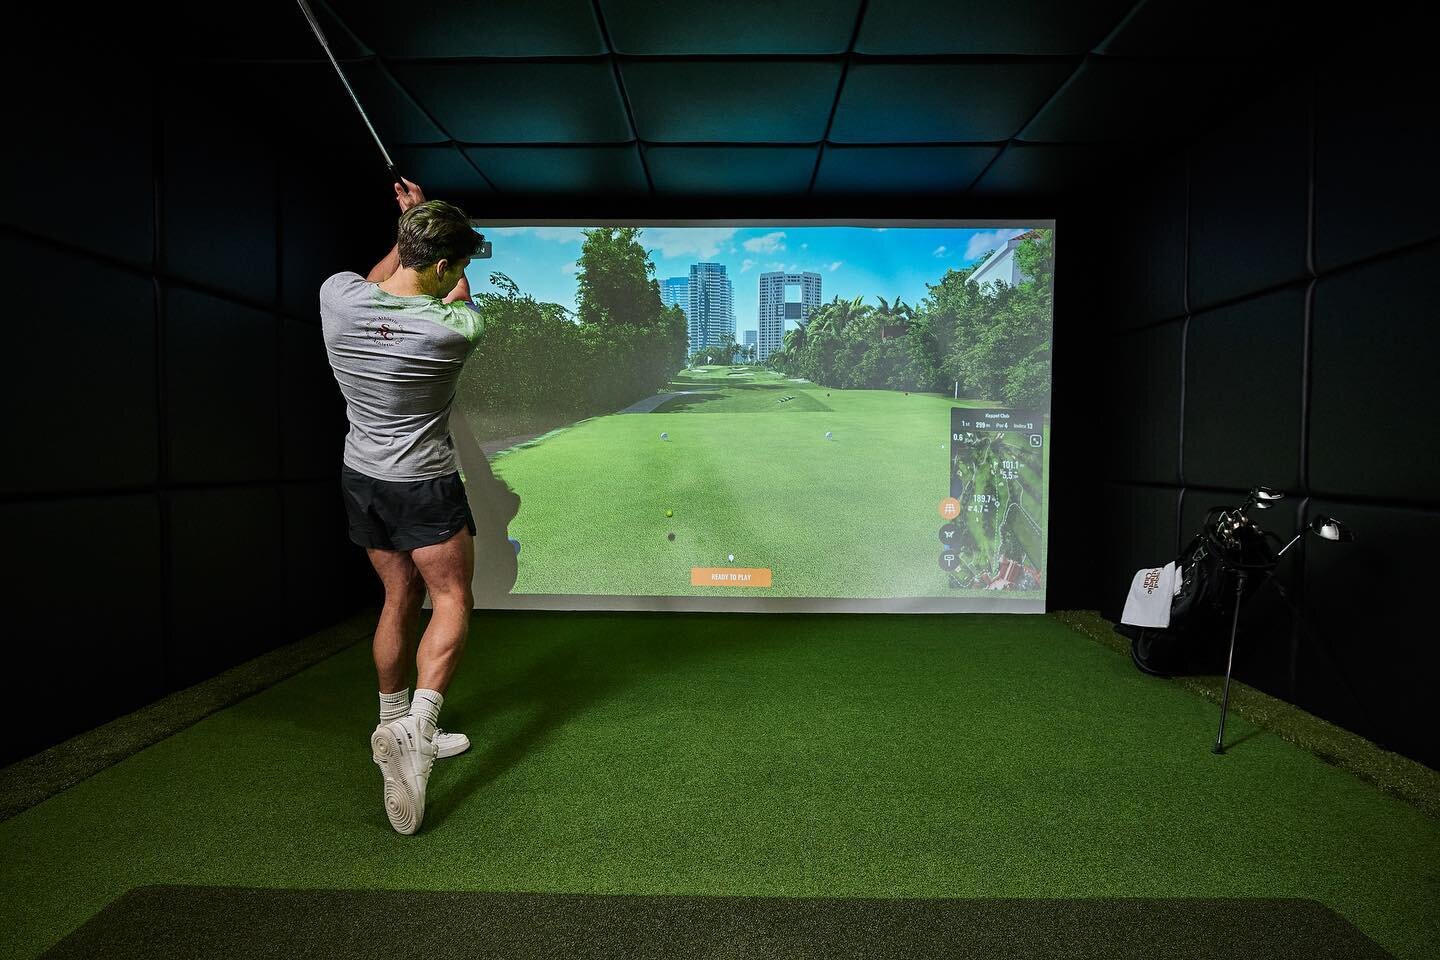 Have you tried our @trackmangolf Simulator yet? 
Multiple options available 
$45 ( 1 Hour) 
10 pack $425
Or Gym Access plus 1 golf a week $65 ⛳️